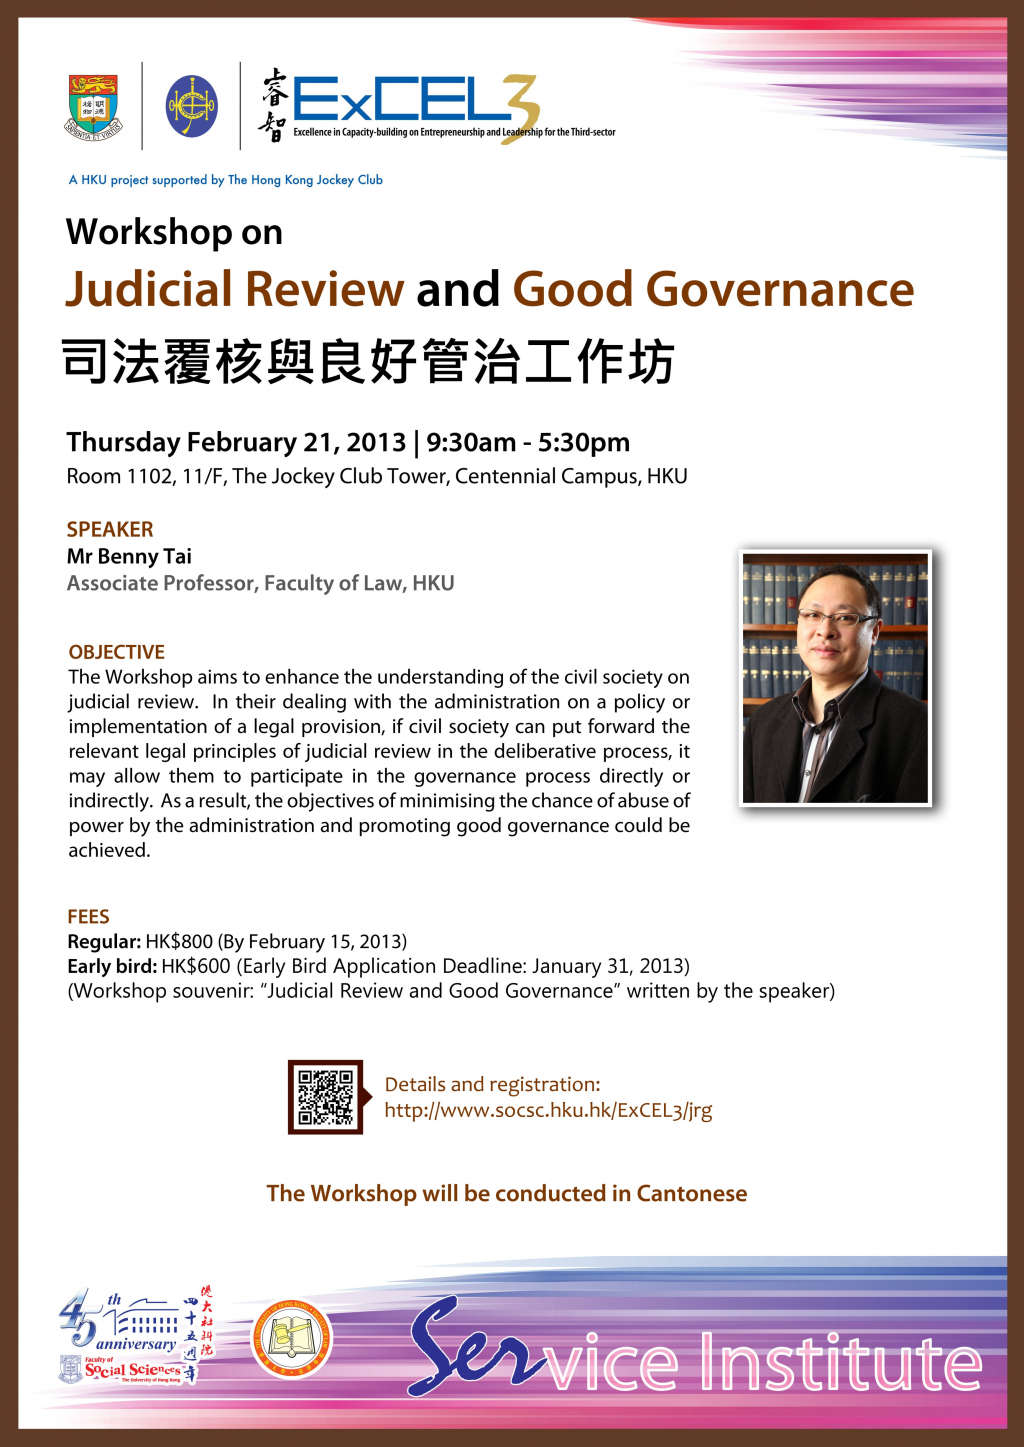 Workshop on Judicial Review and Good Governance